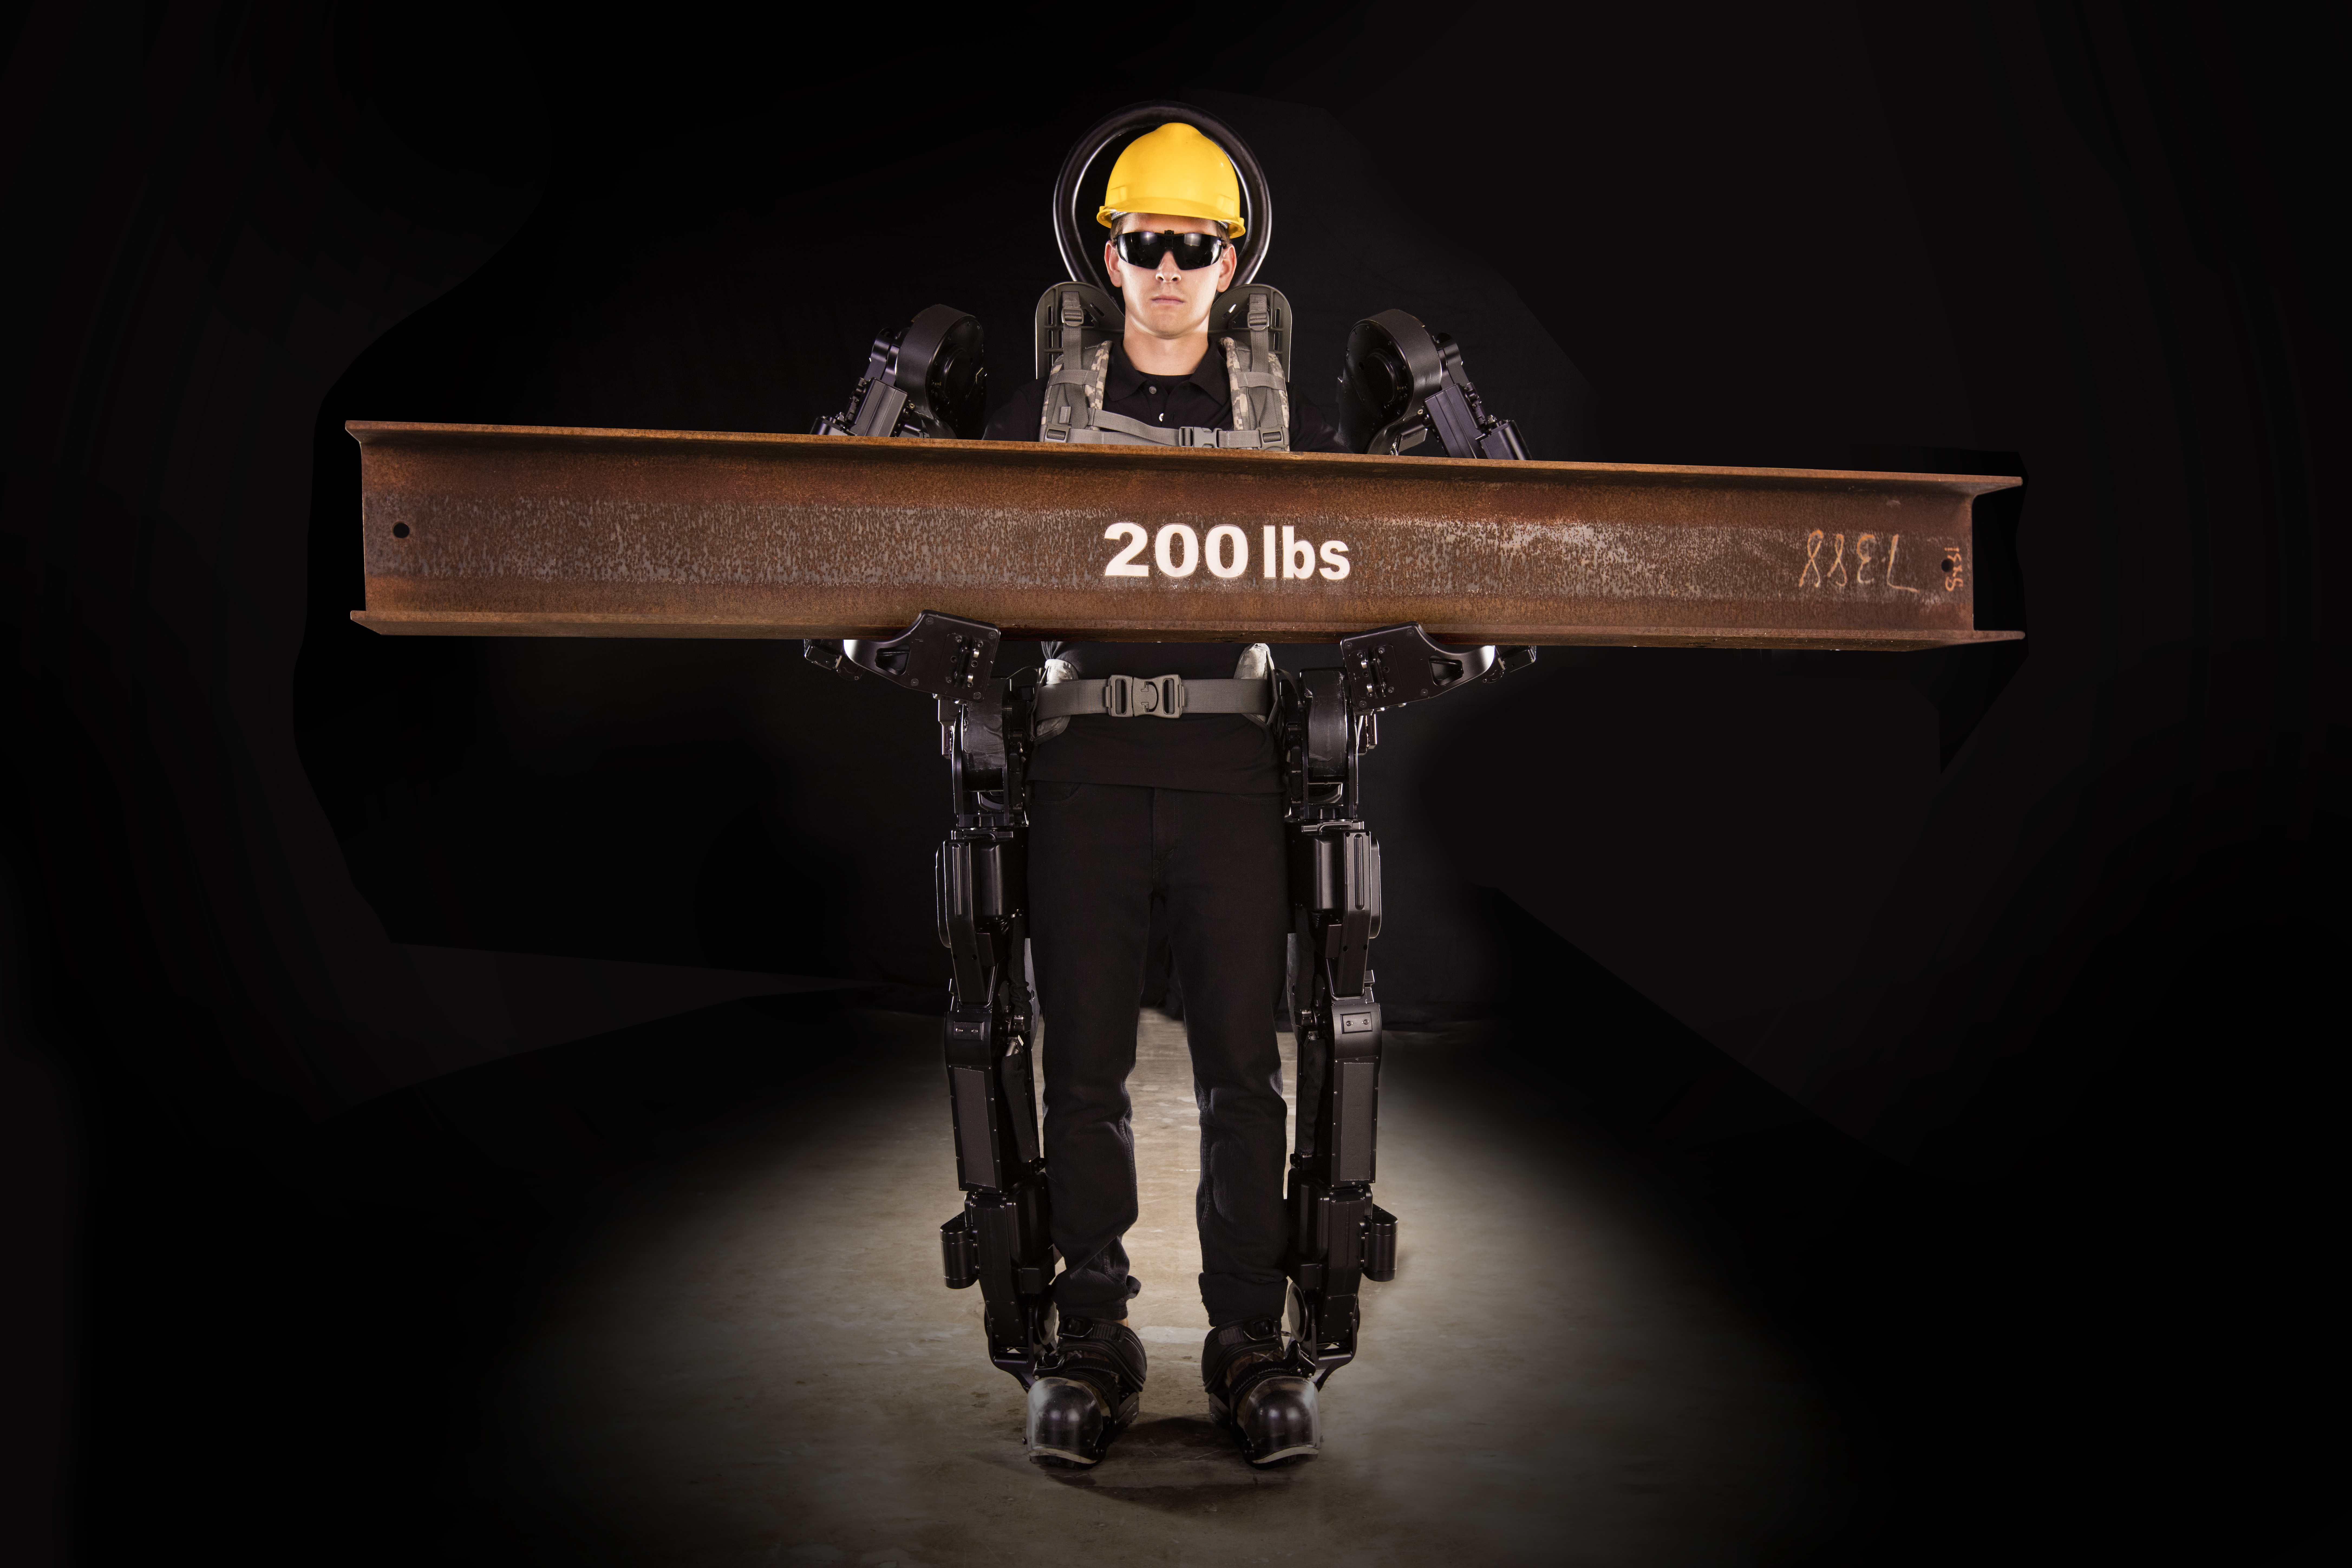 And finally... Can full-body exoskeletons increase safety and productivity?